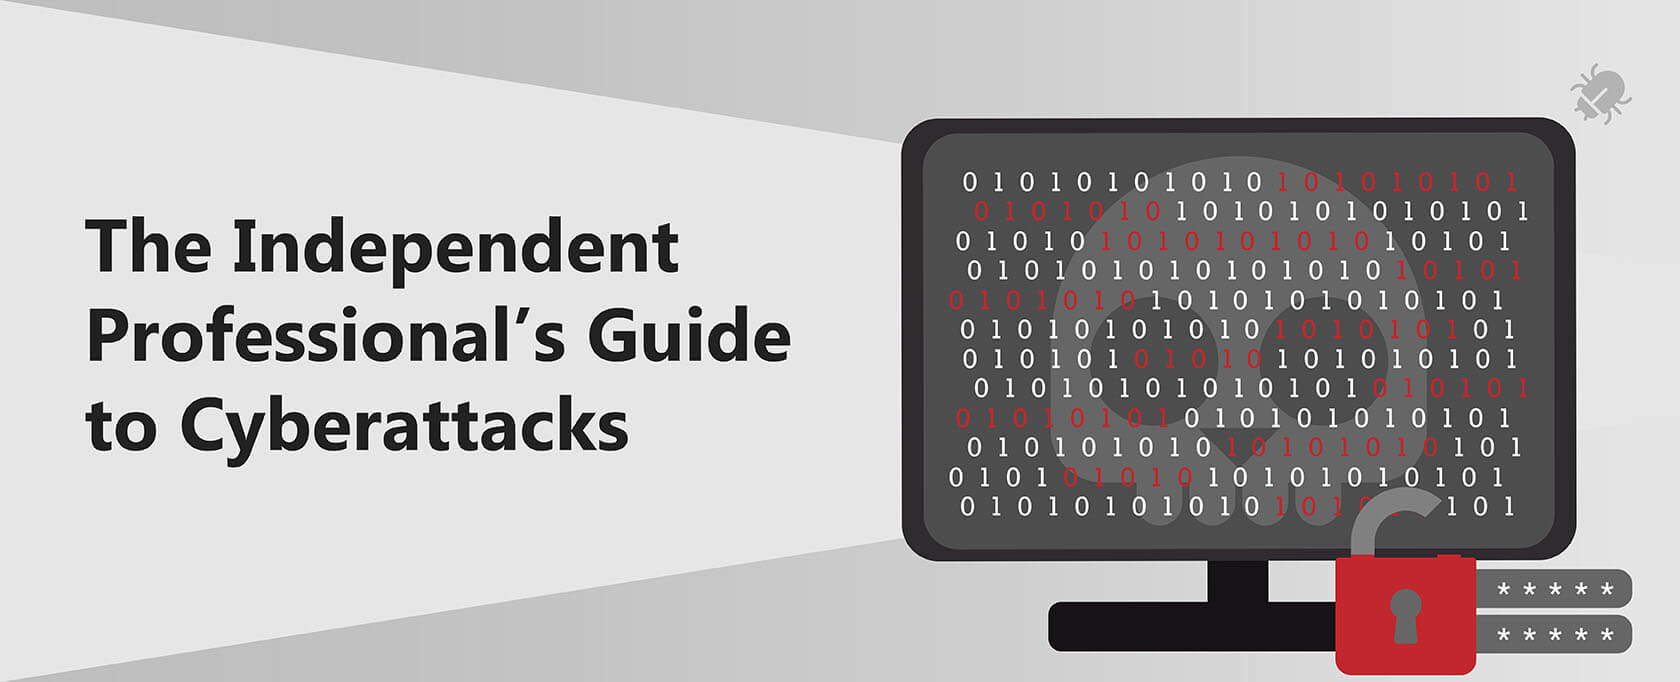 The Independent Professional’s Guide to Cyberattacks